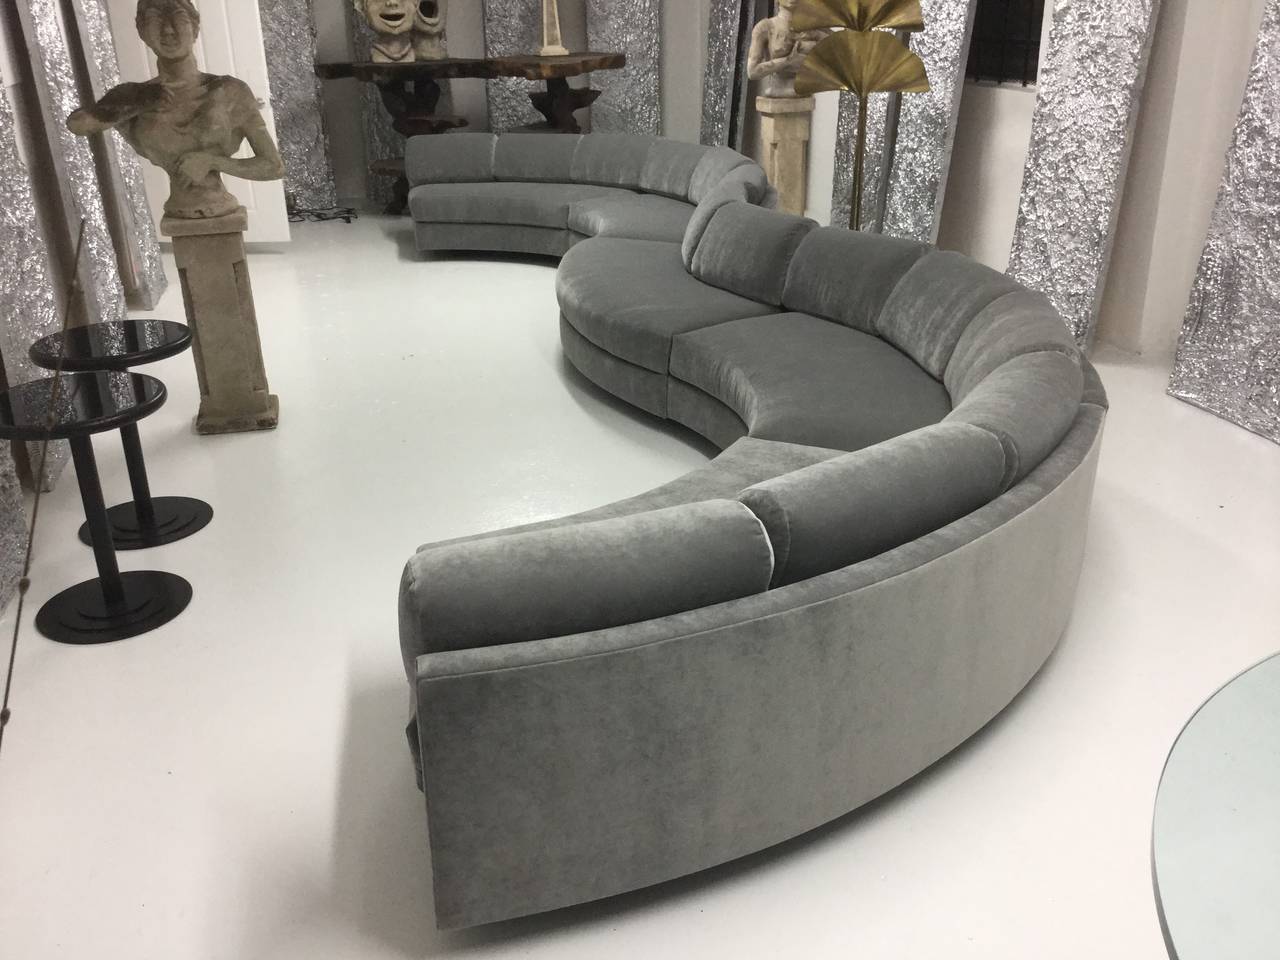 Sectional sofa designed by Adrian Pearsall for Craft Associates.
Five curved sections, each approximately 78